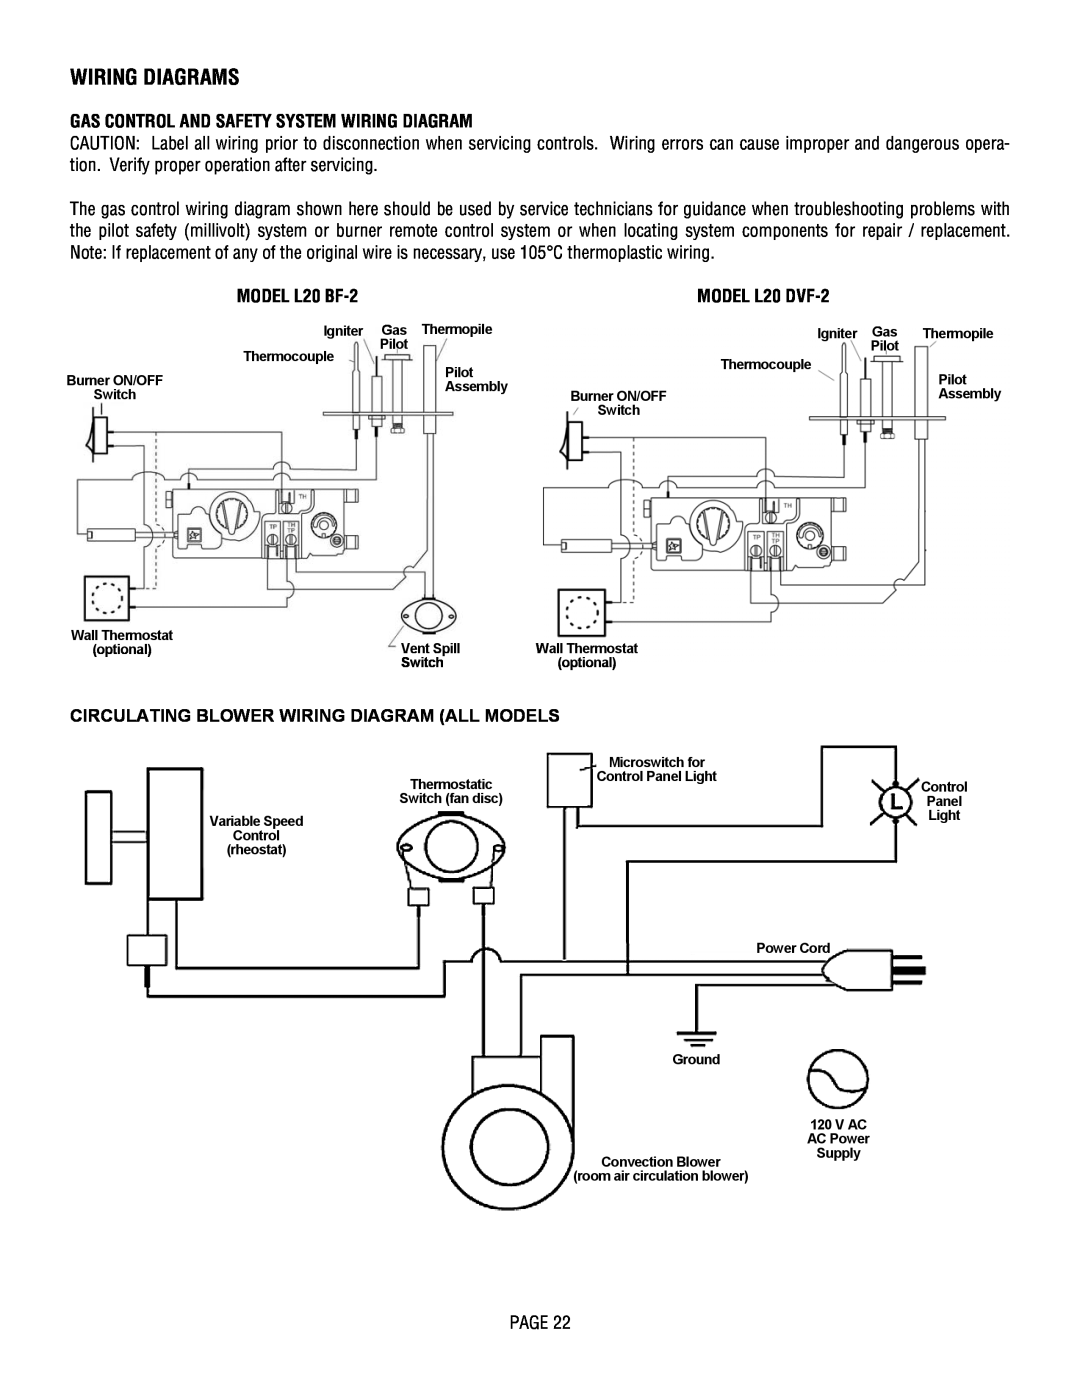 Lennox Hearth manual Wiring Diagrams, Gas Control And Safety System Wiring Diagram, MODEL L20 BF-2, MODEL L20 DVF-2 